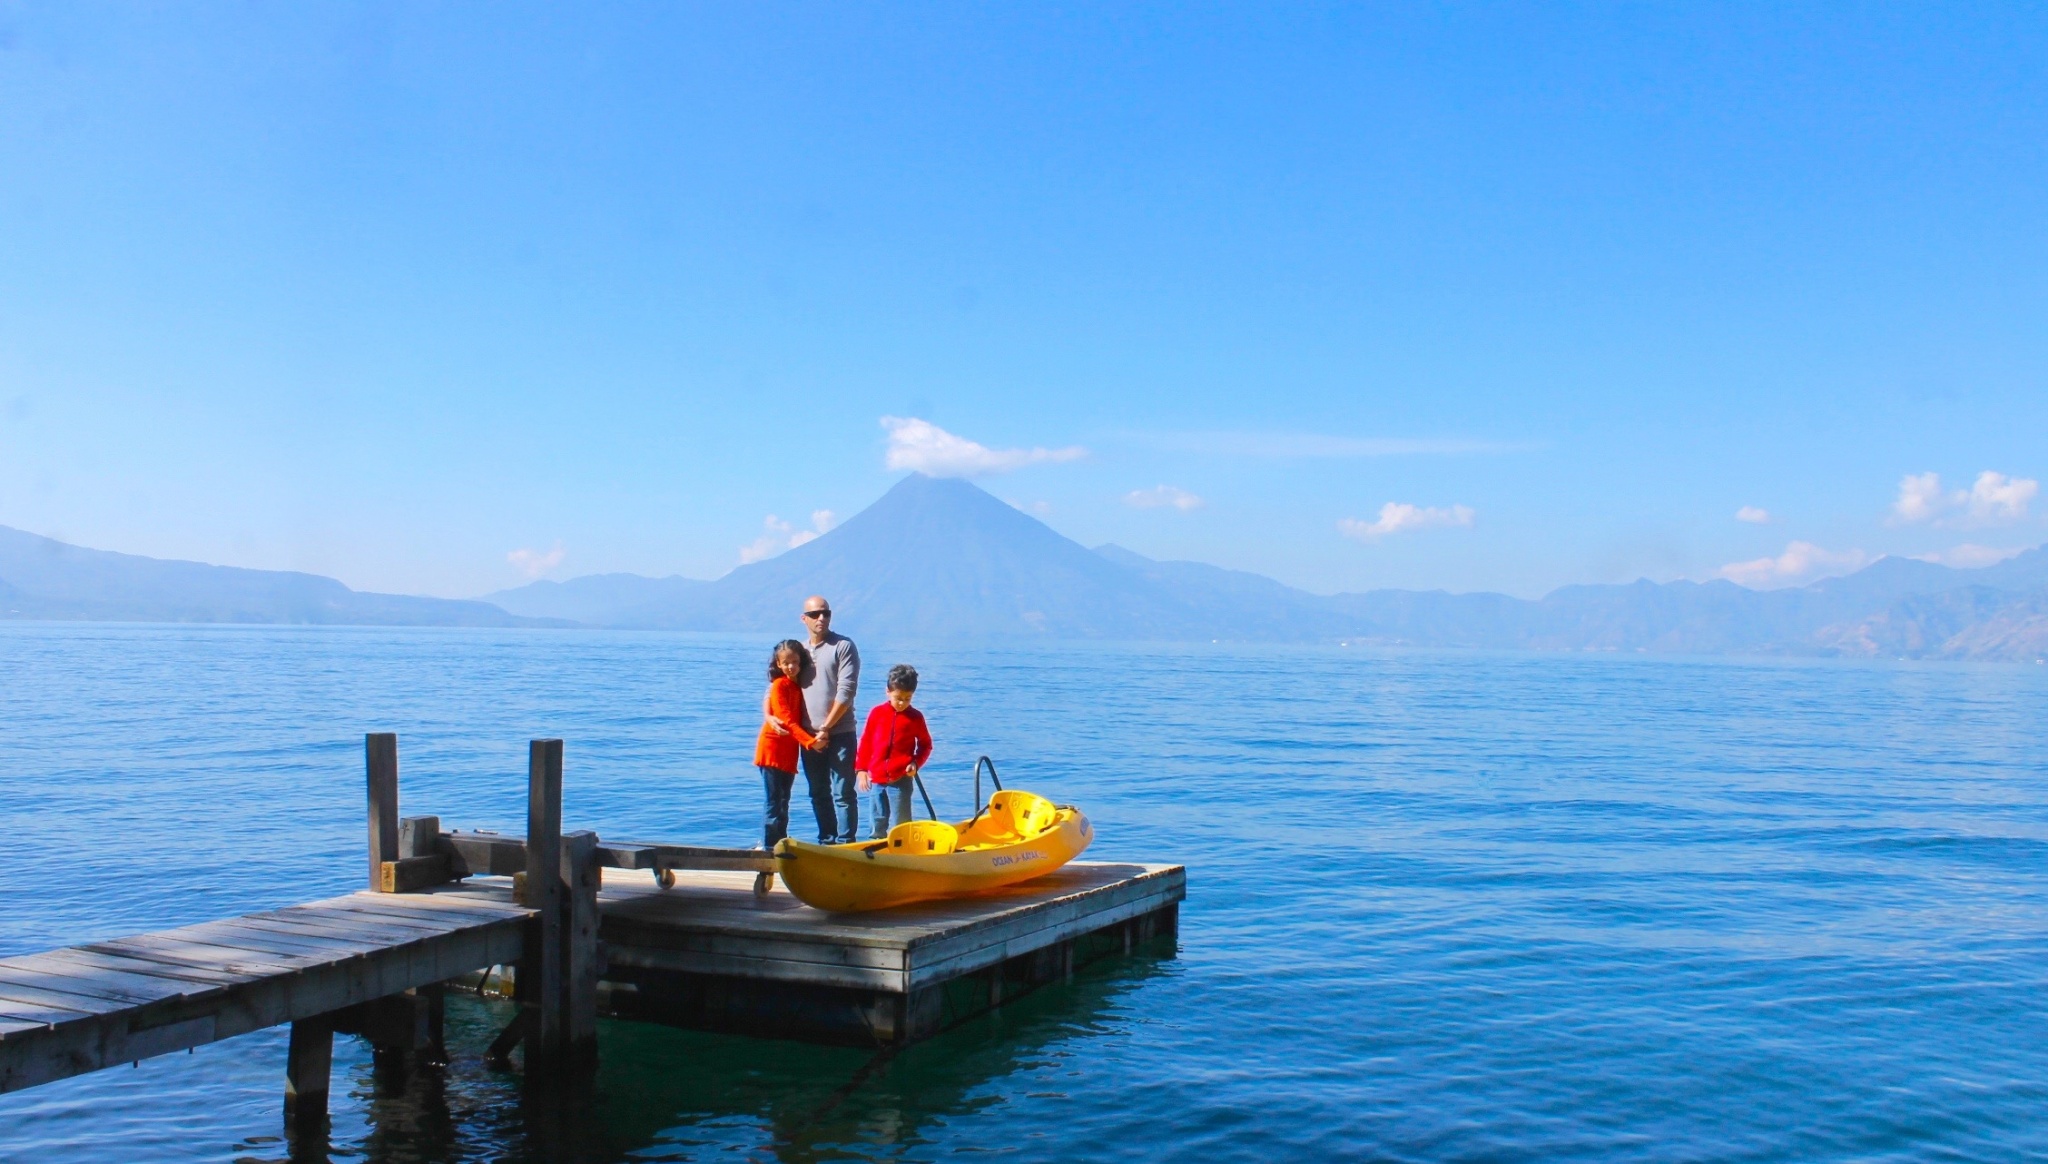 Atitlán Guatemala is truly a magical place